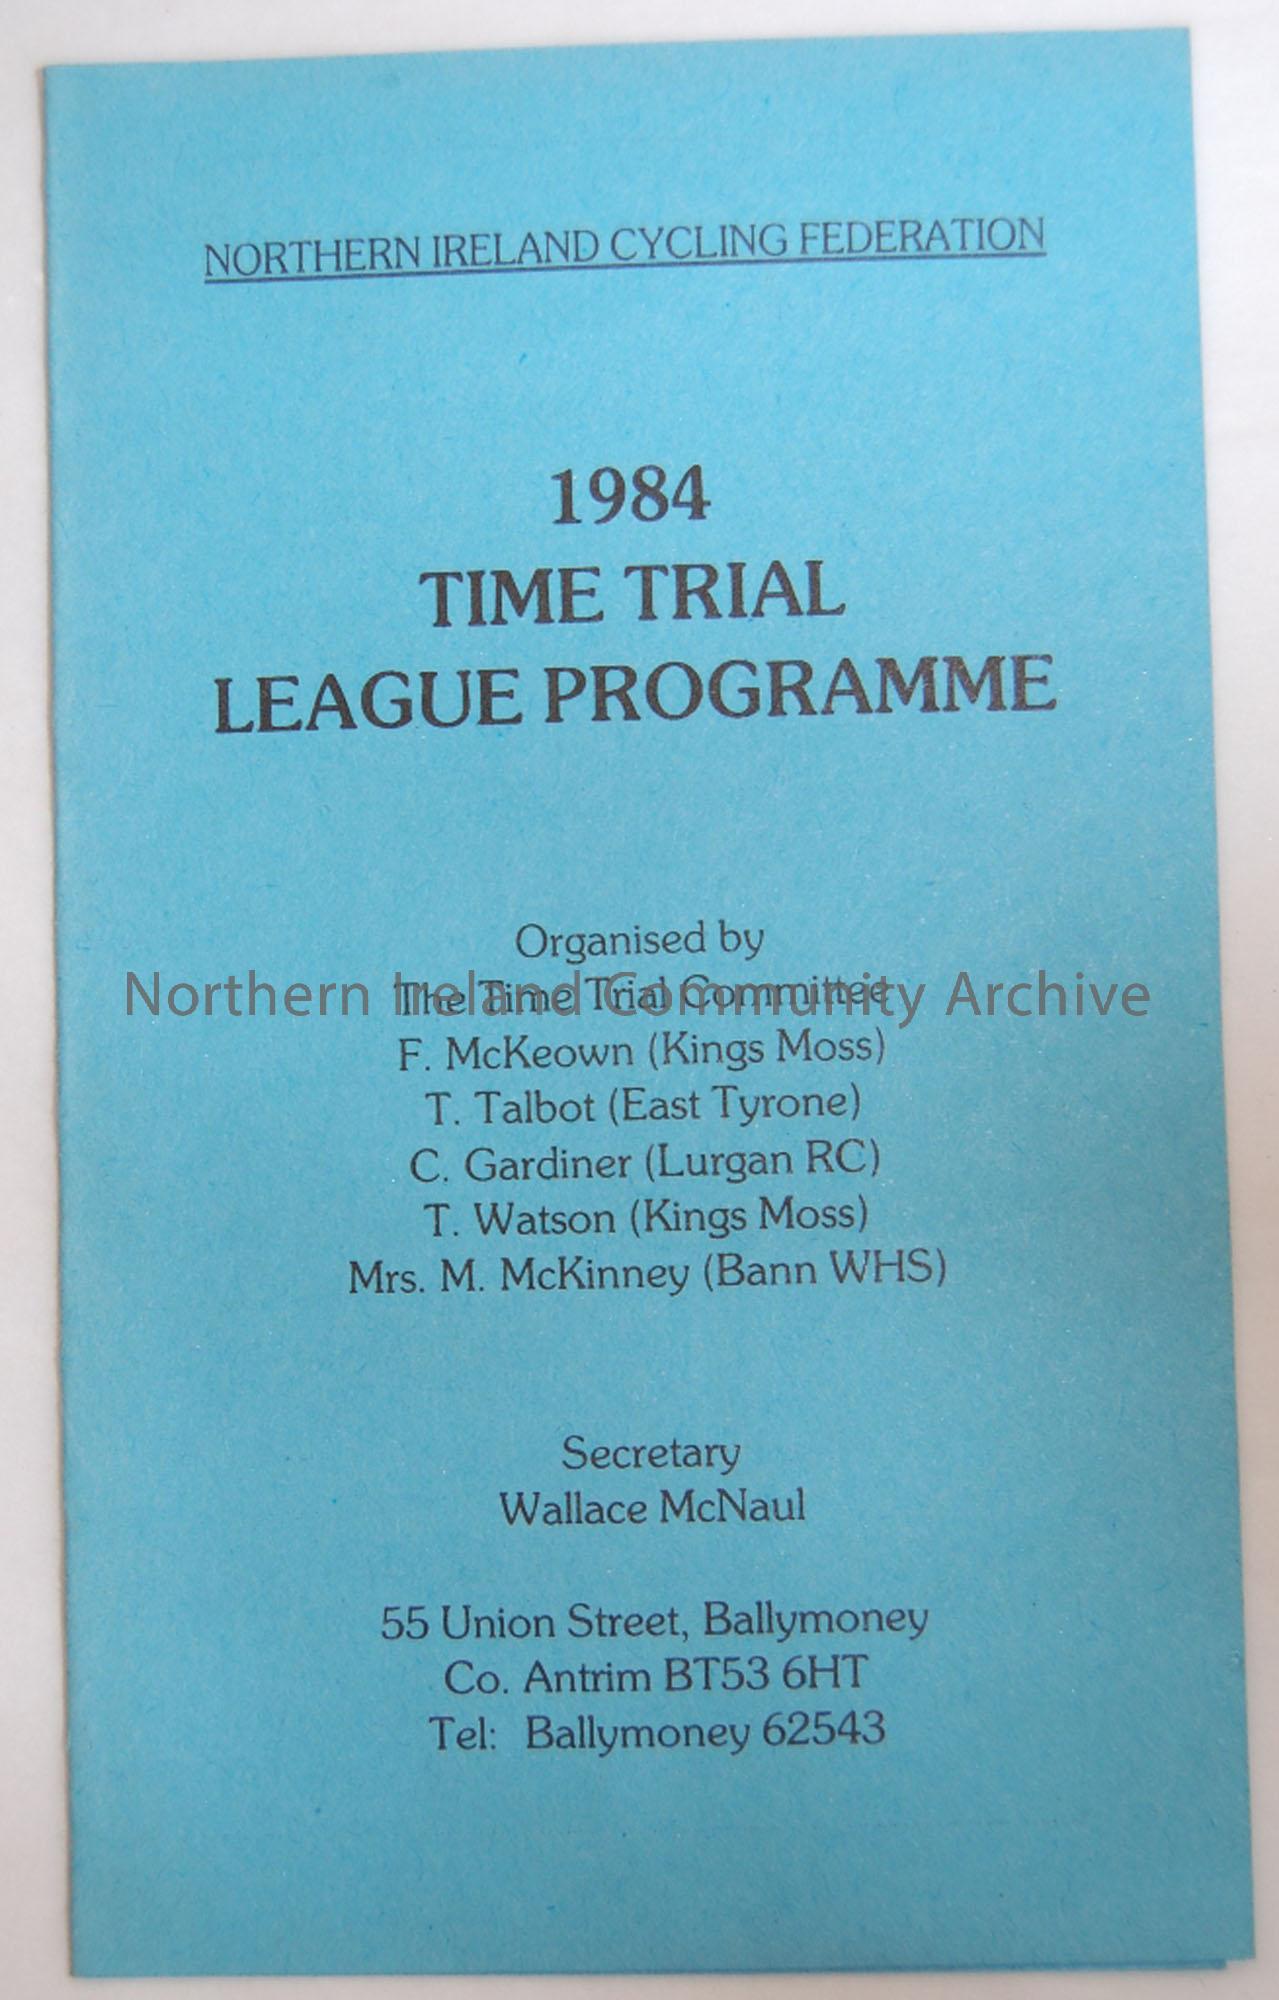 Northern Ireland Cycling Federation 1984 Time Trial league programme.